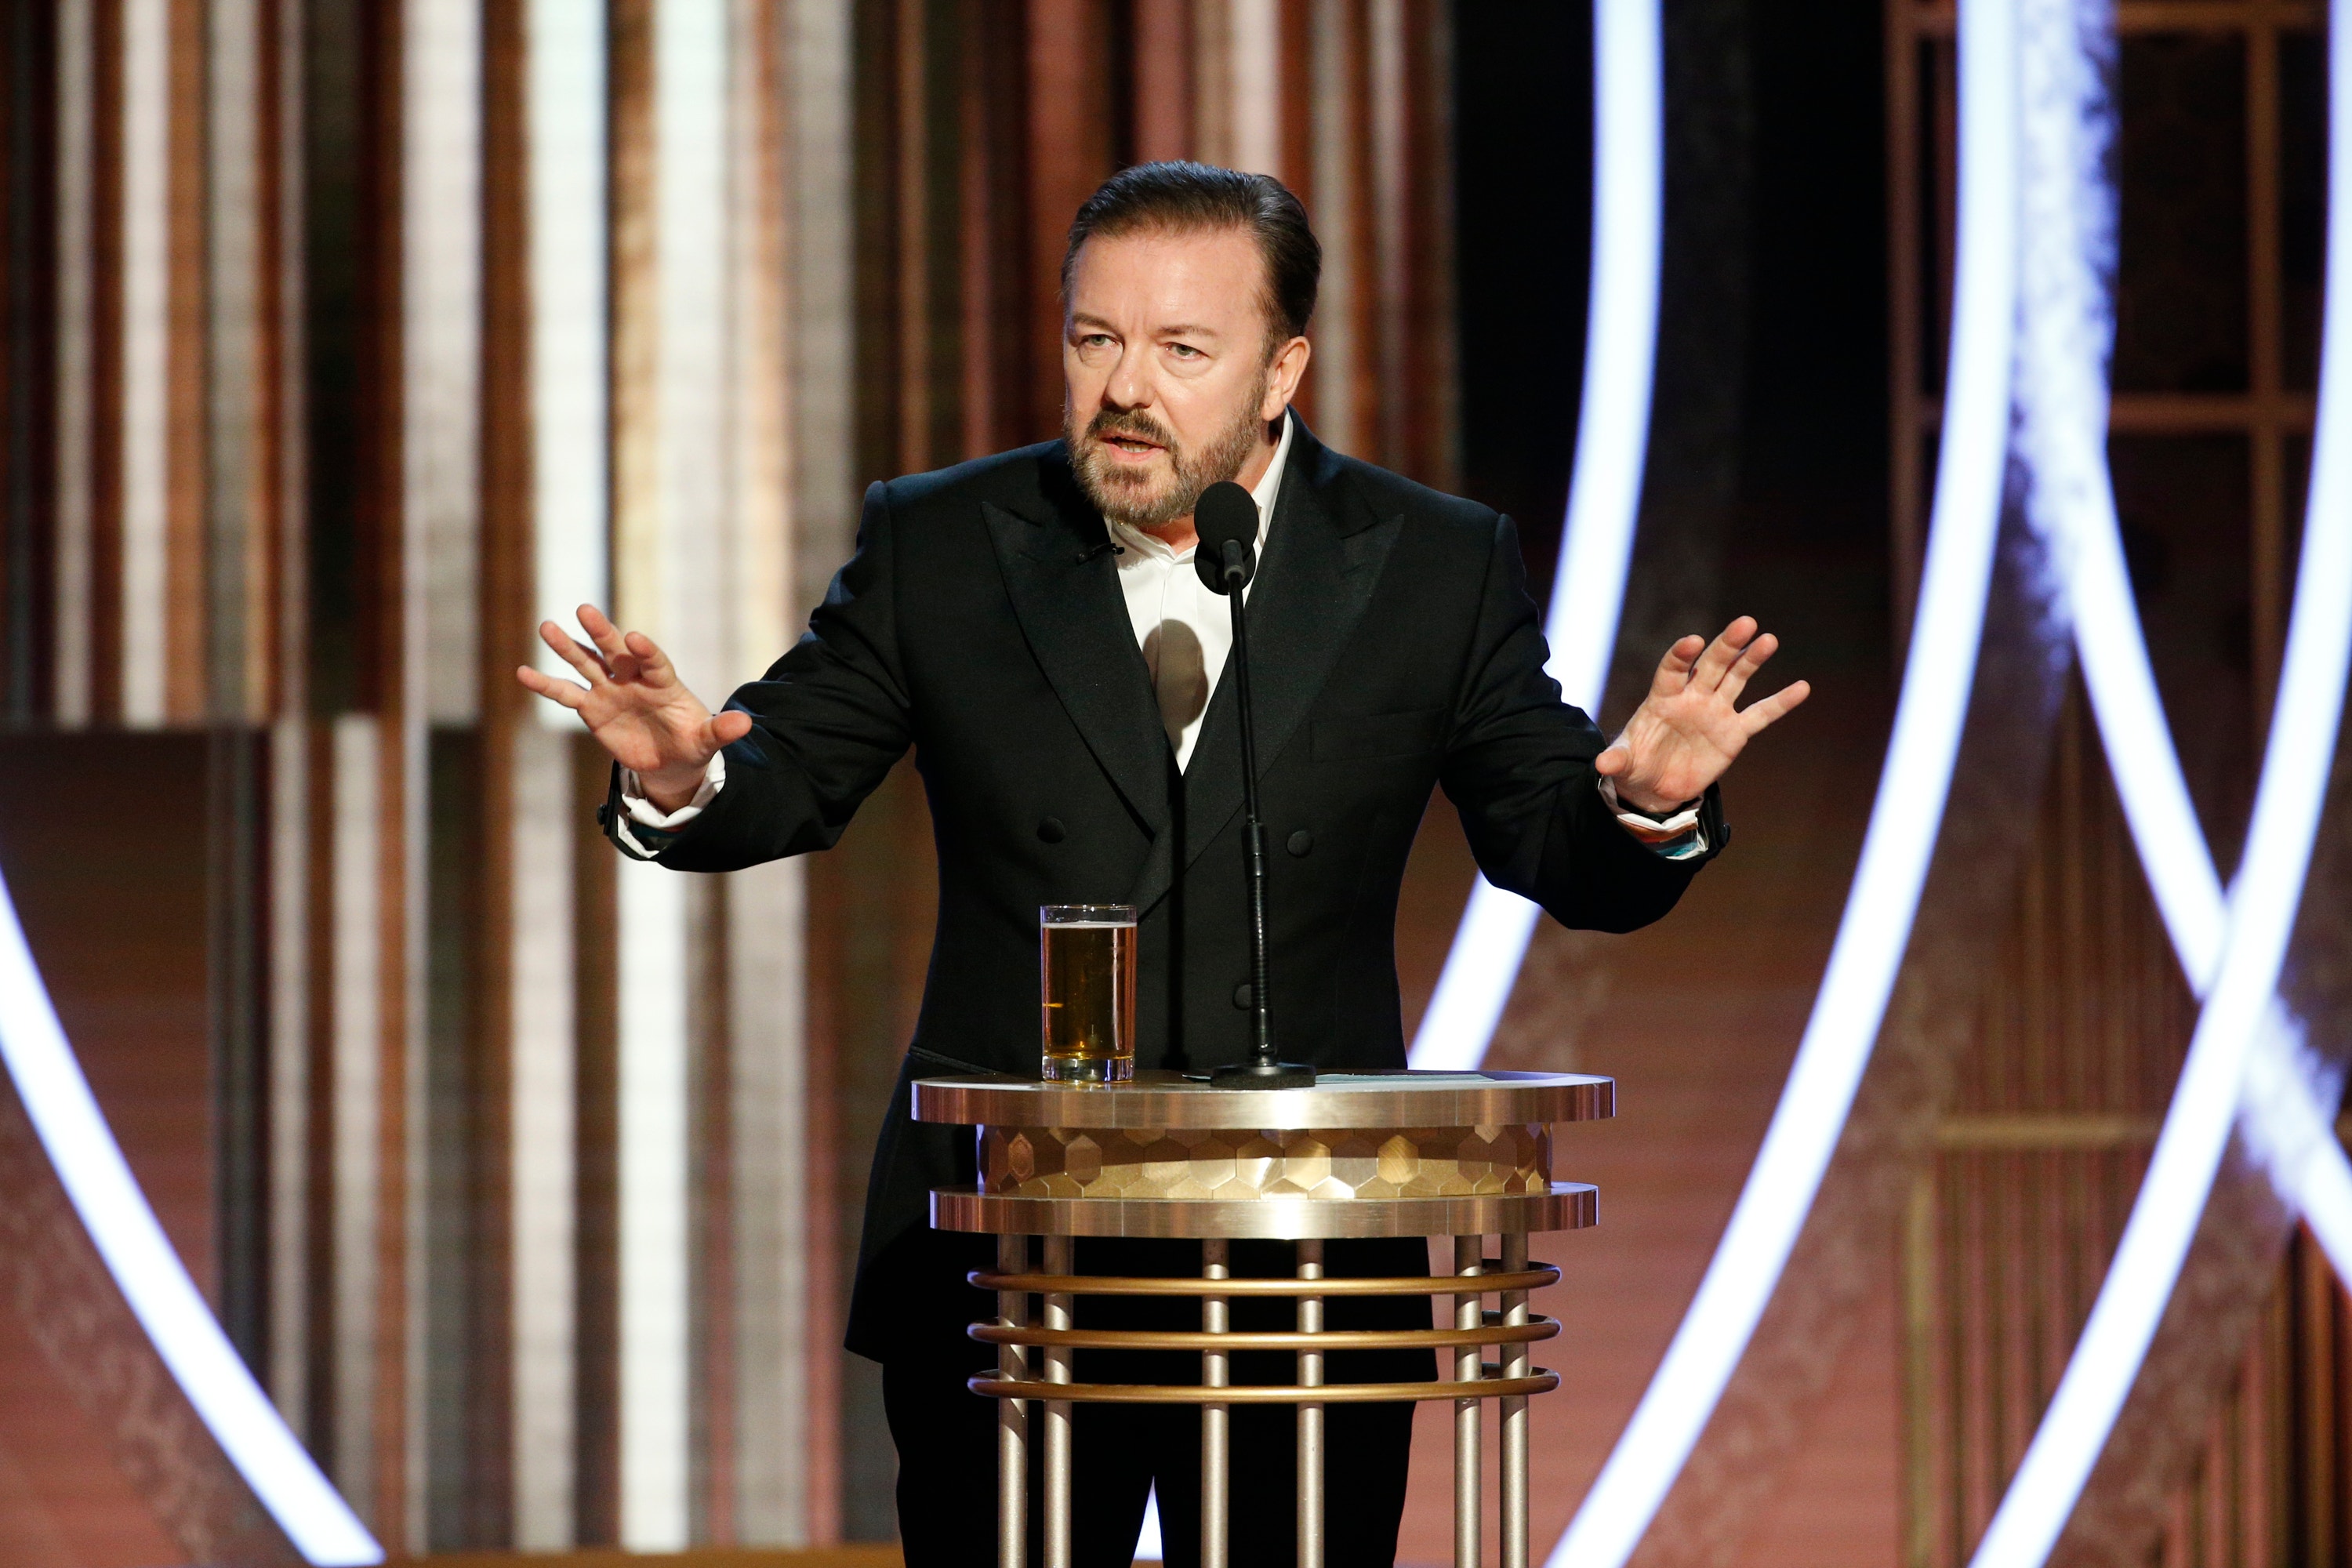 Ricky Gervais provided his two cents on whether he would host the Golden Globes again. (Paul Drinkwater/NBCUniversal Media, LLC via Getty Images)